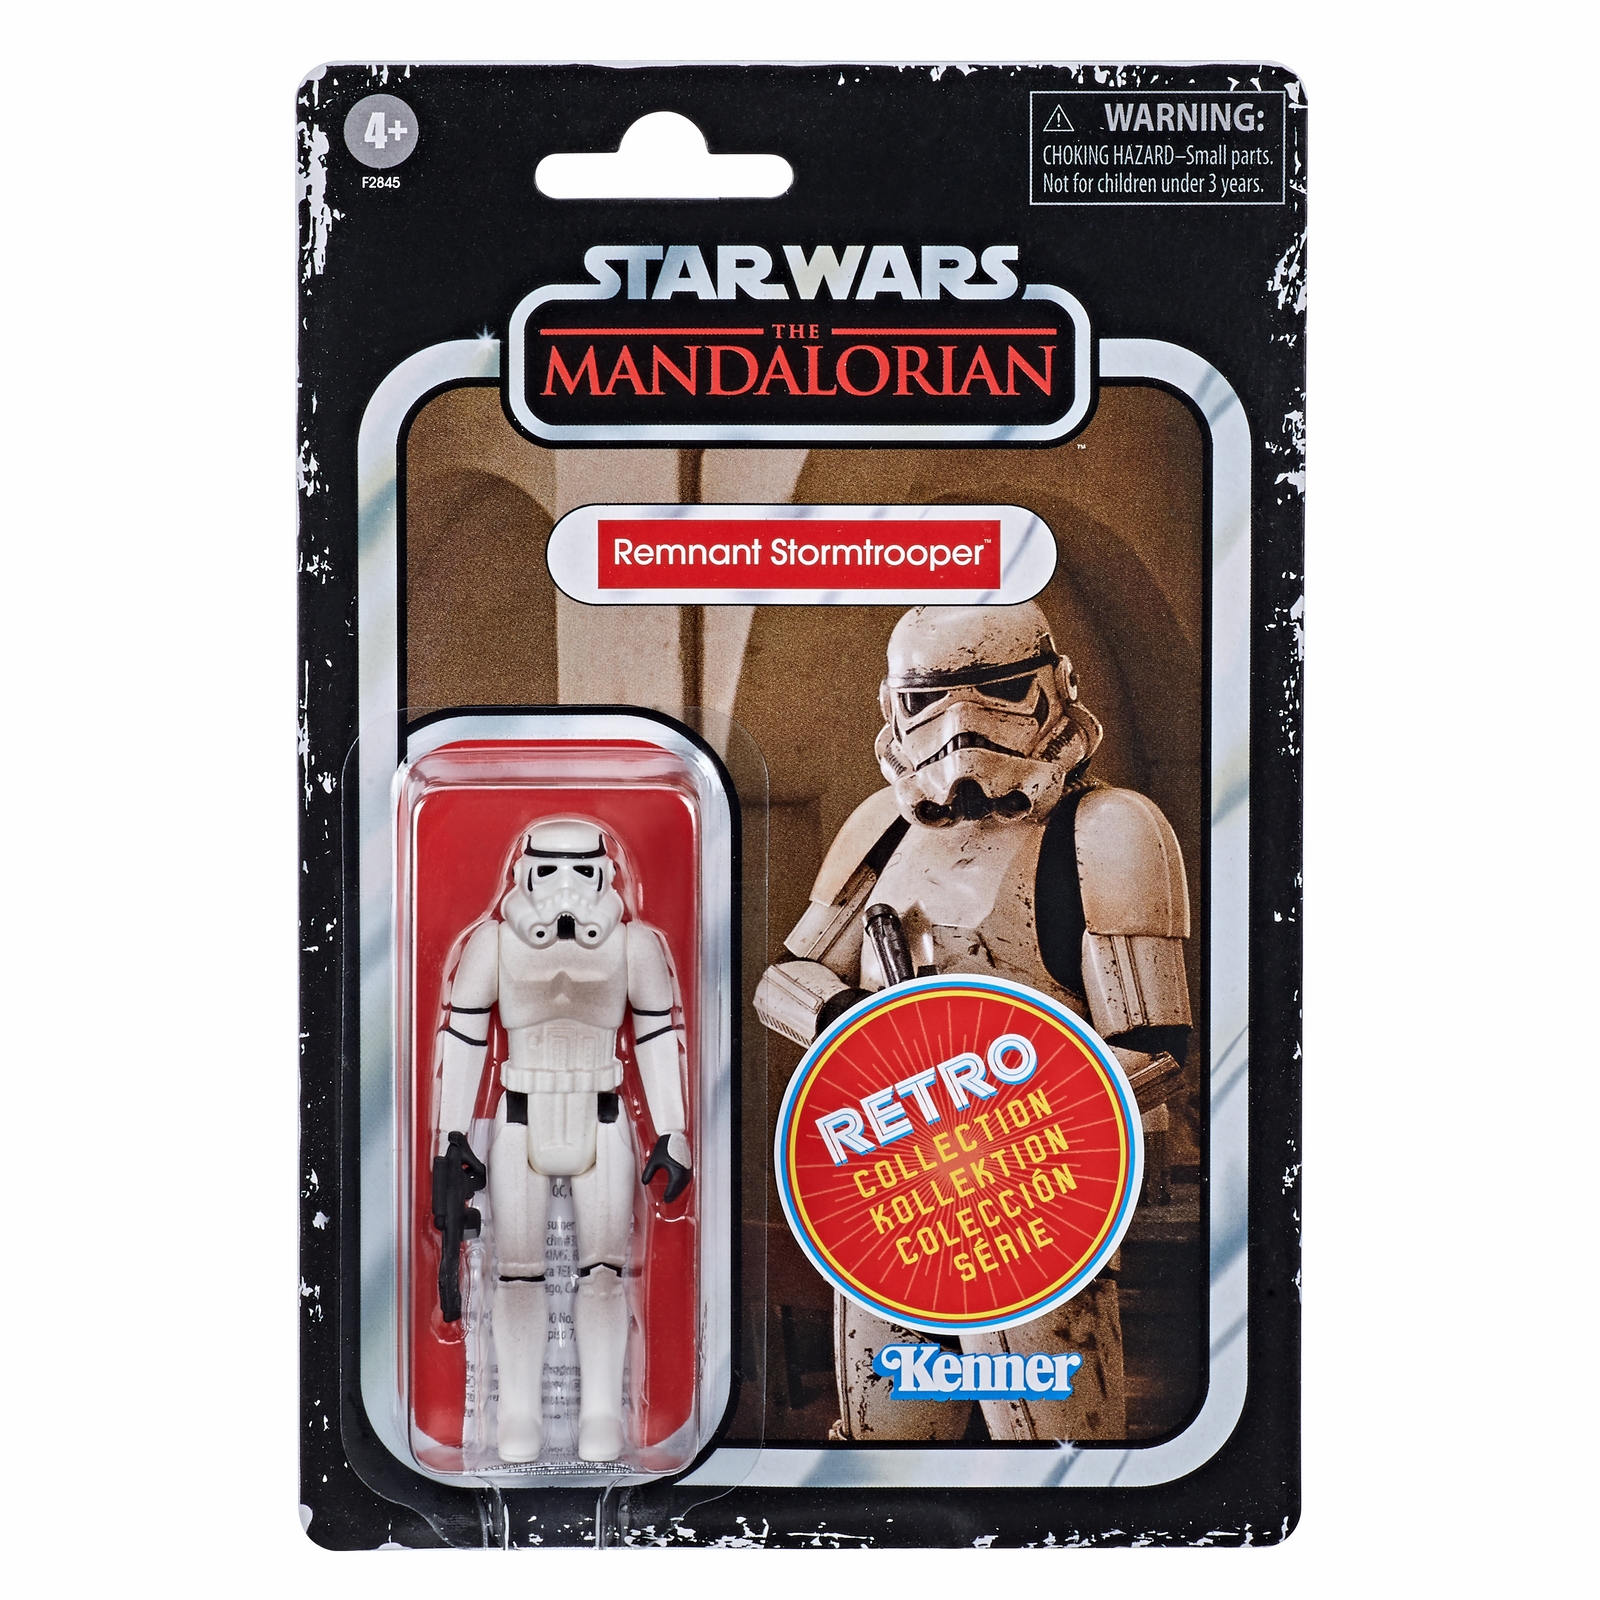 MONOPOLY STAR WARS THE MANDALORIAN EDITION With Figure - Remnant Stormtrooper Figure in pck.jpg